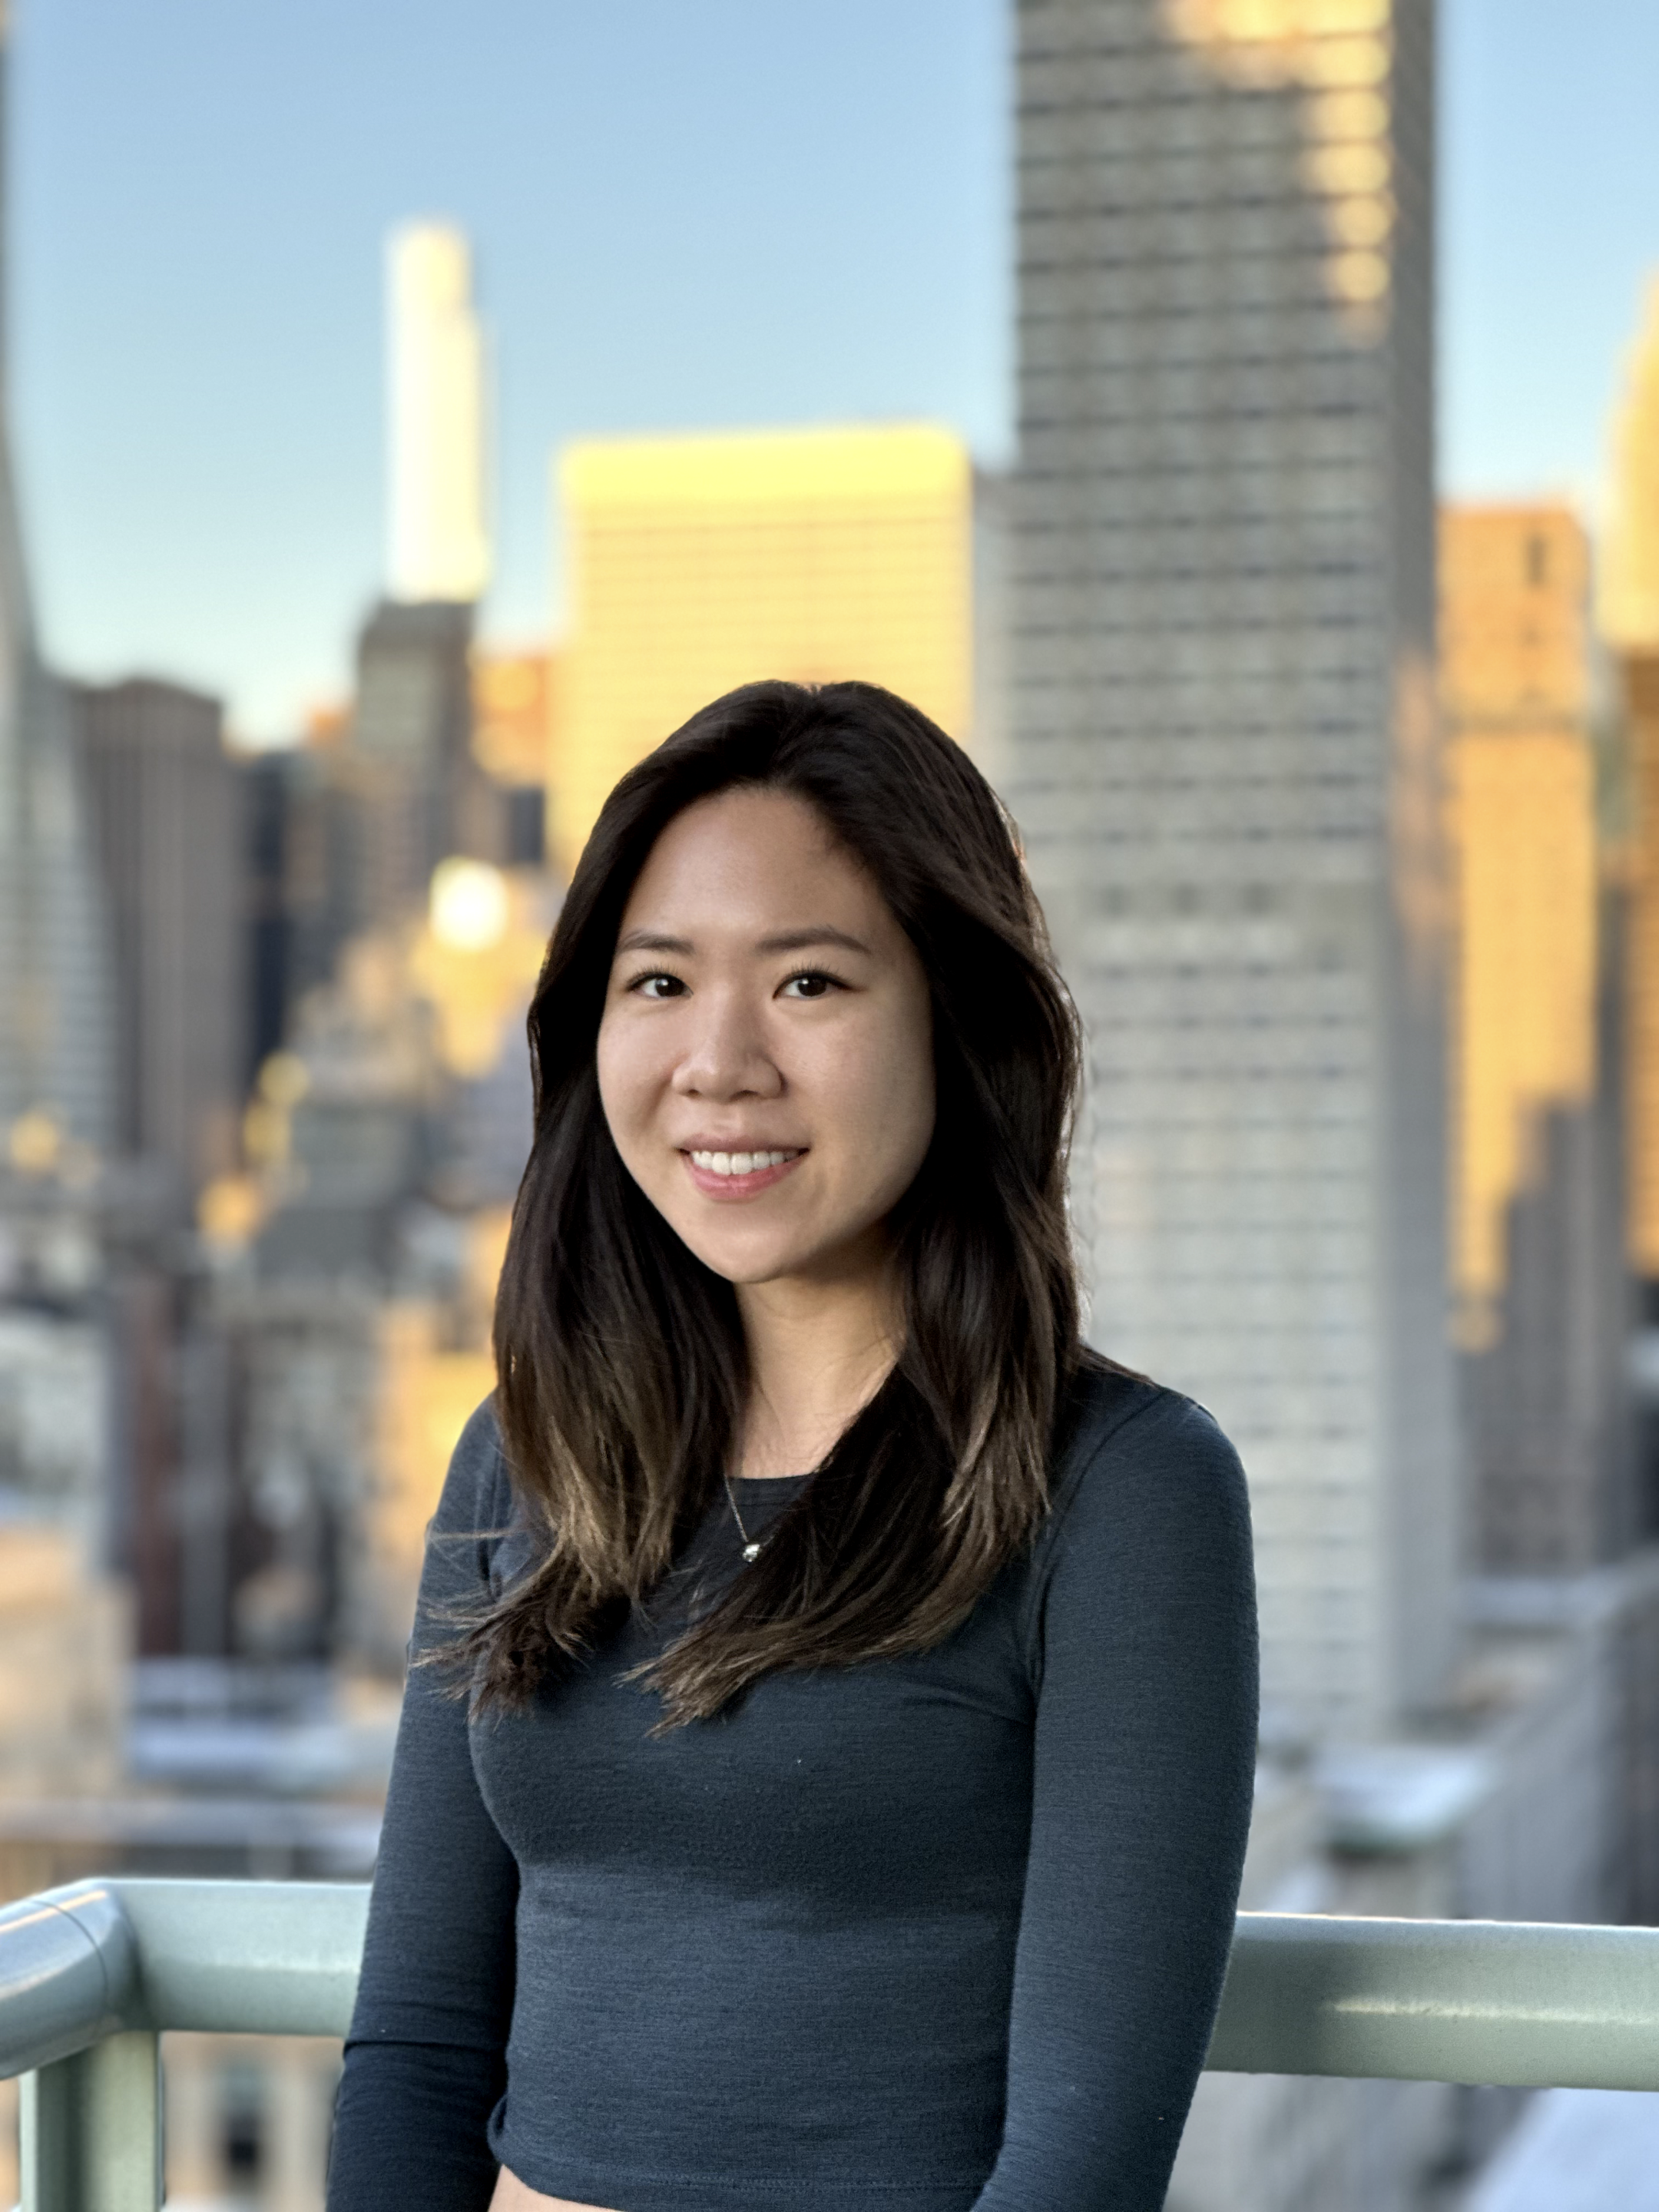 Kelly was raised in Maryland and attended Emory University, where she studied Political Science and Economics. After graduation, she moved to NYC and currently works in the crypto industry. In her spare time, Kelly enjoys attending concerts, making bagels and working out at Barry's to burn off all the bagels consumed.